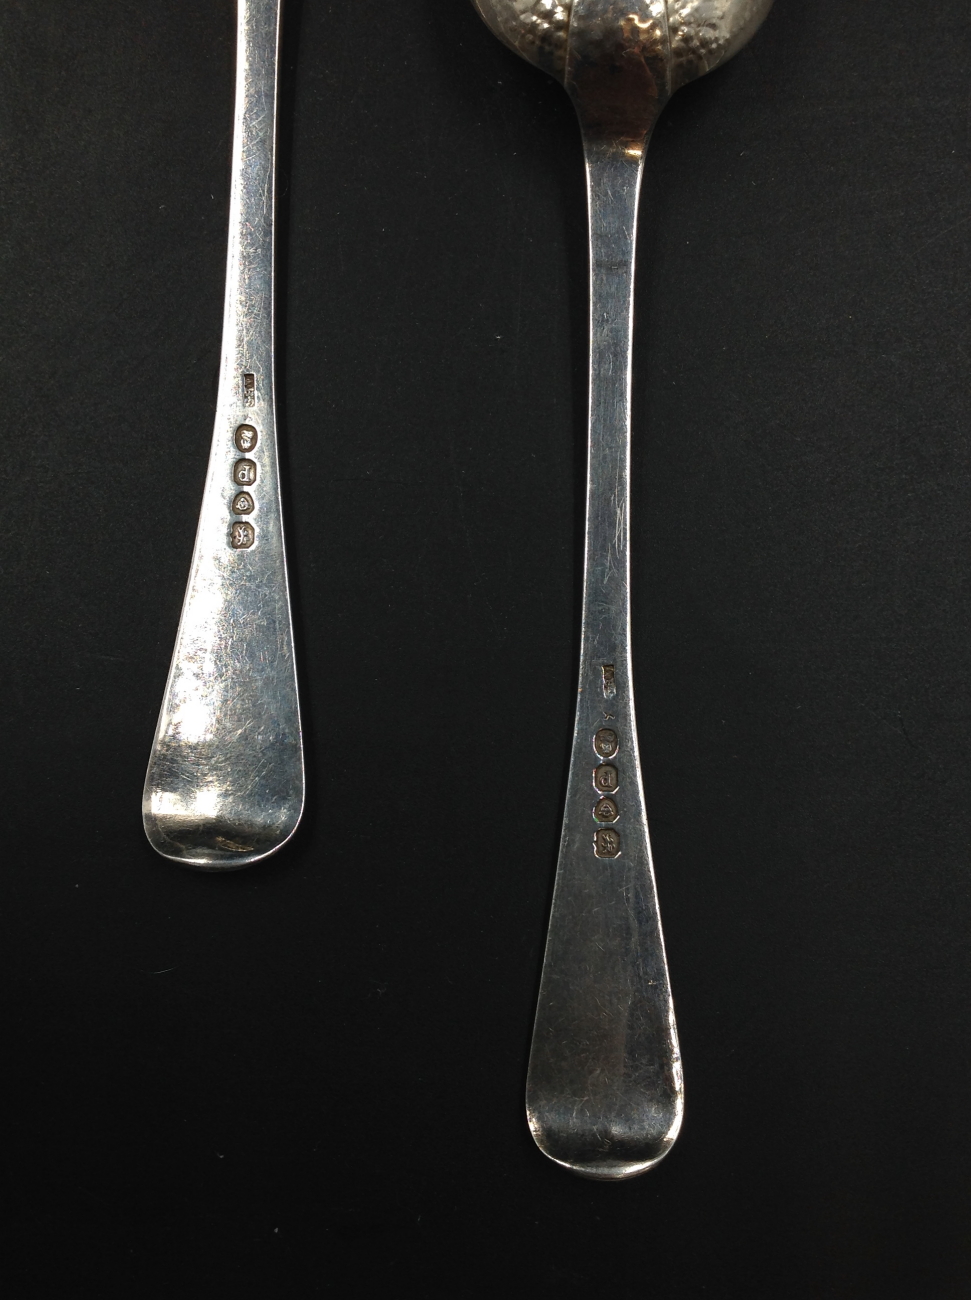 A PAIR OF GEORGIAN SILVER HALLMARKED SPOONS DECORATED WITH BAMBOO, BIRDS AND FOLIAGE DATED LONDON - Image 5 of 5